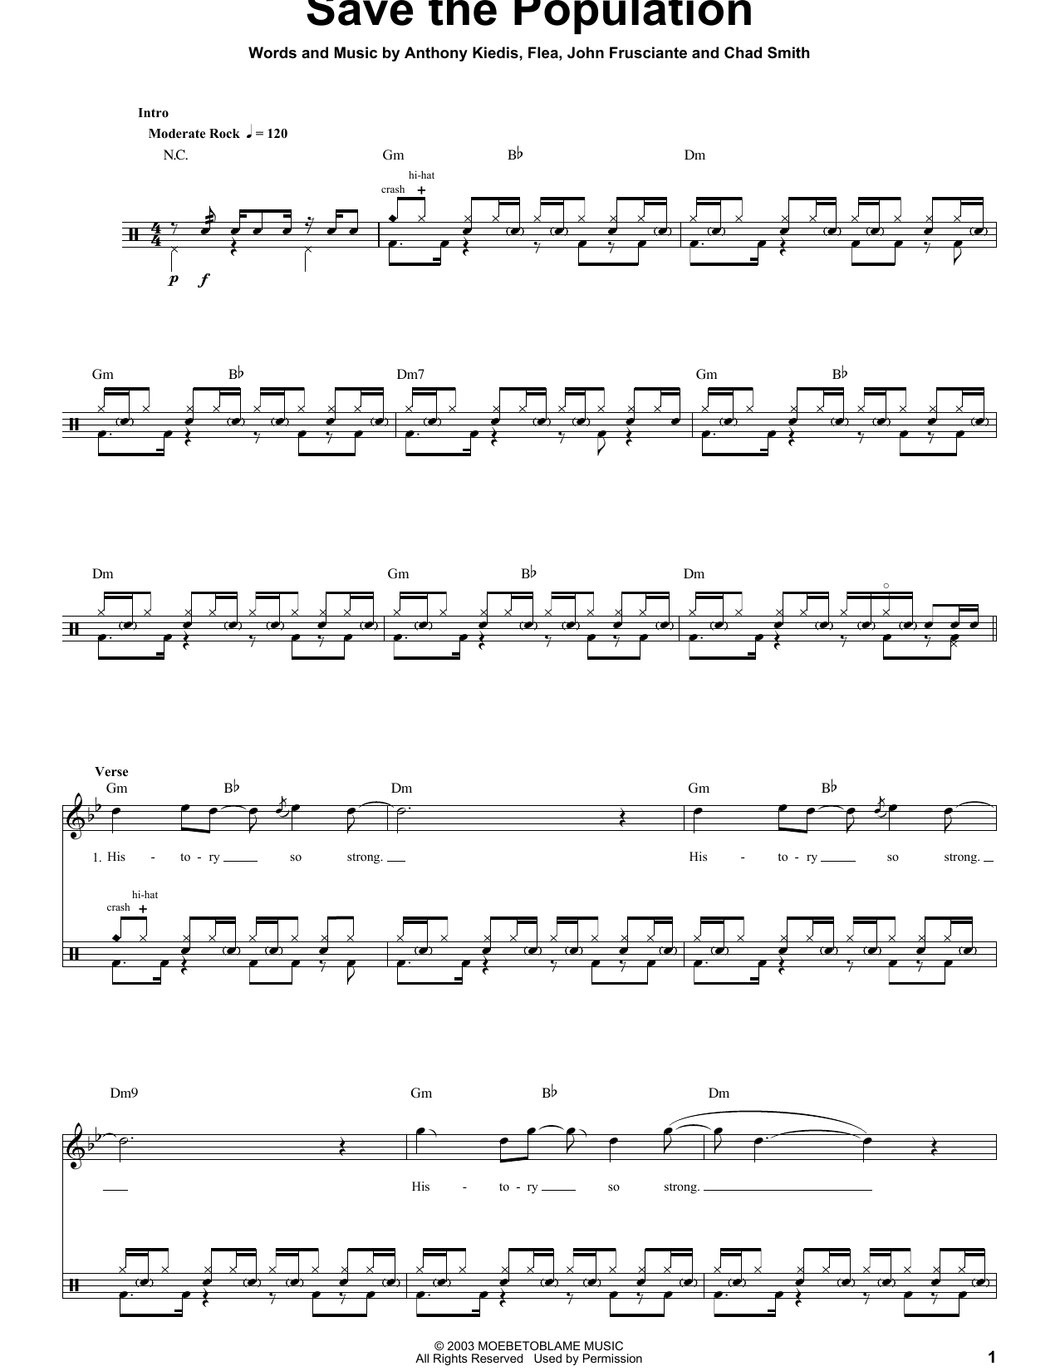 Save the Population - Red Hot Chili Peppers - Full Drum Transcription / Drum Sheet Music - SheetMusicDirect DT